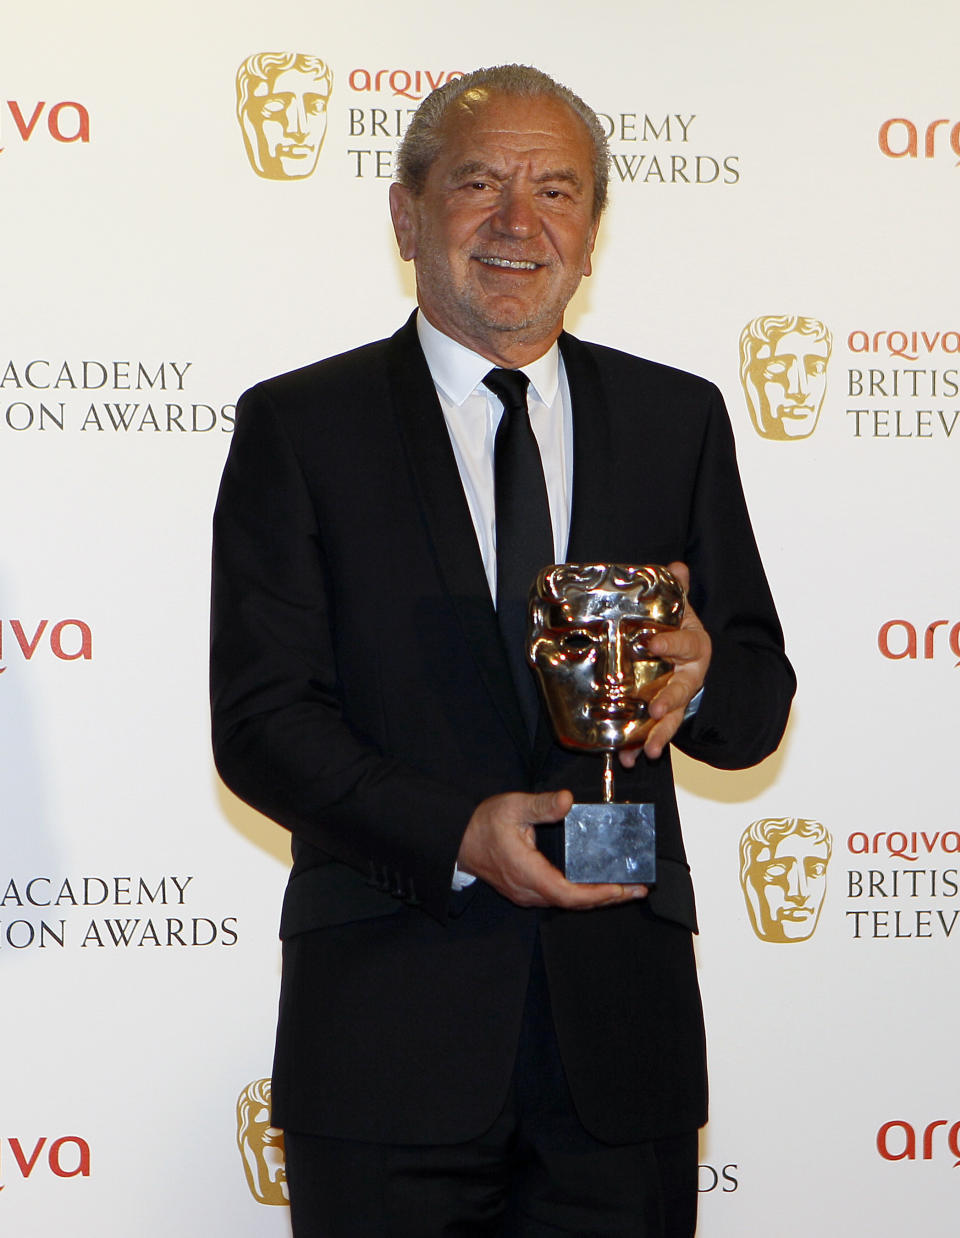 British businessman Alan Sugar holds the Reality and Factual Award for Young Apprentice at  the British Academy Television Awards in London, Sunday, May 27, 2012. (AP Photo/Kirsty Wigglesworth)